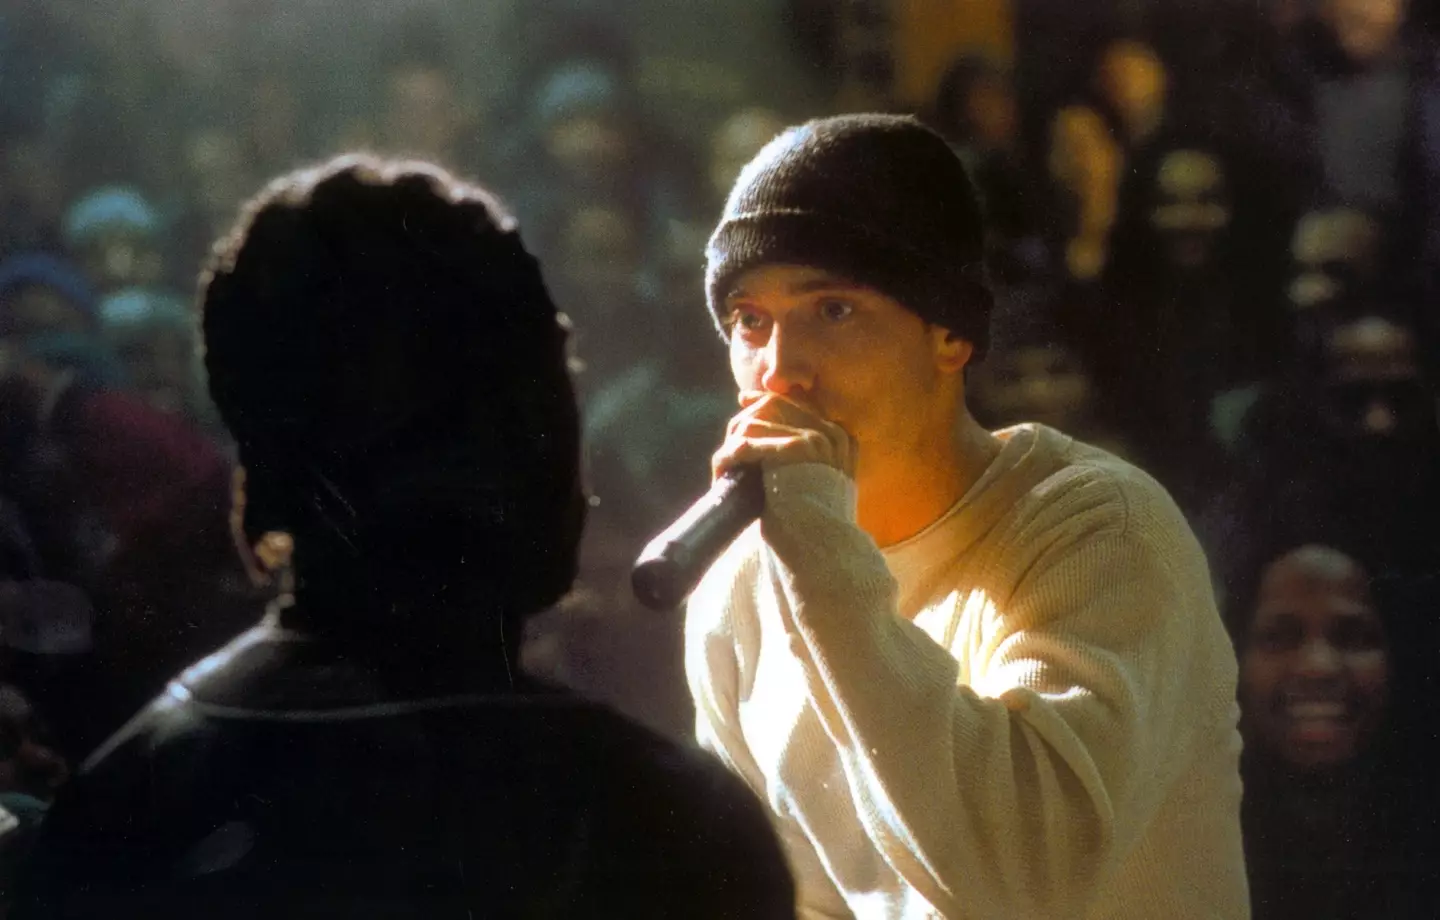 Eminem starred in 2002 biopic movie 8 Mile, and now it could be rebooted as a TV series.